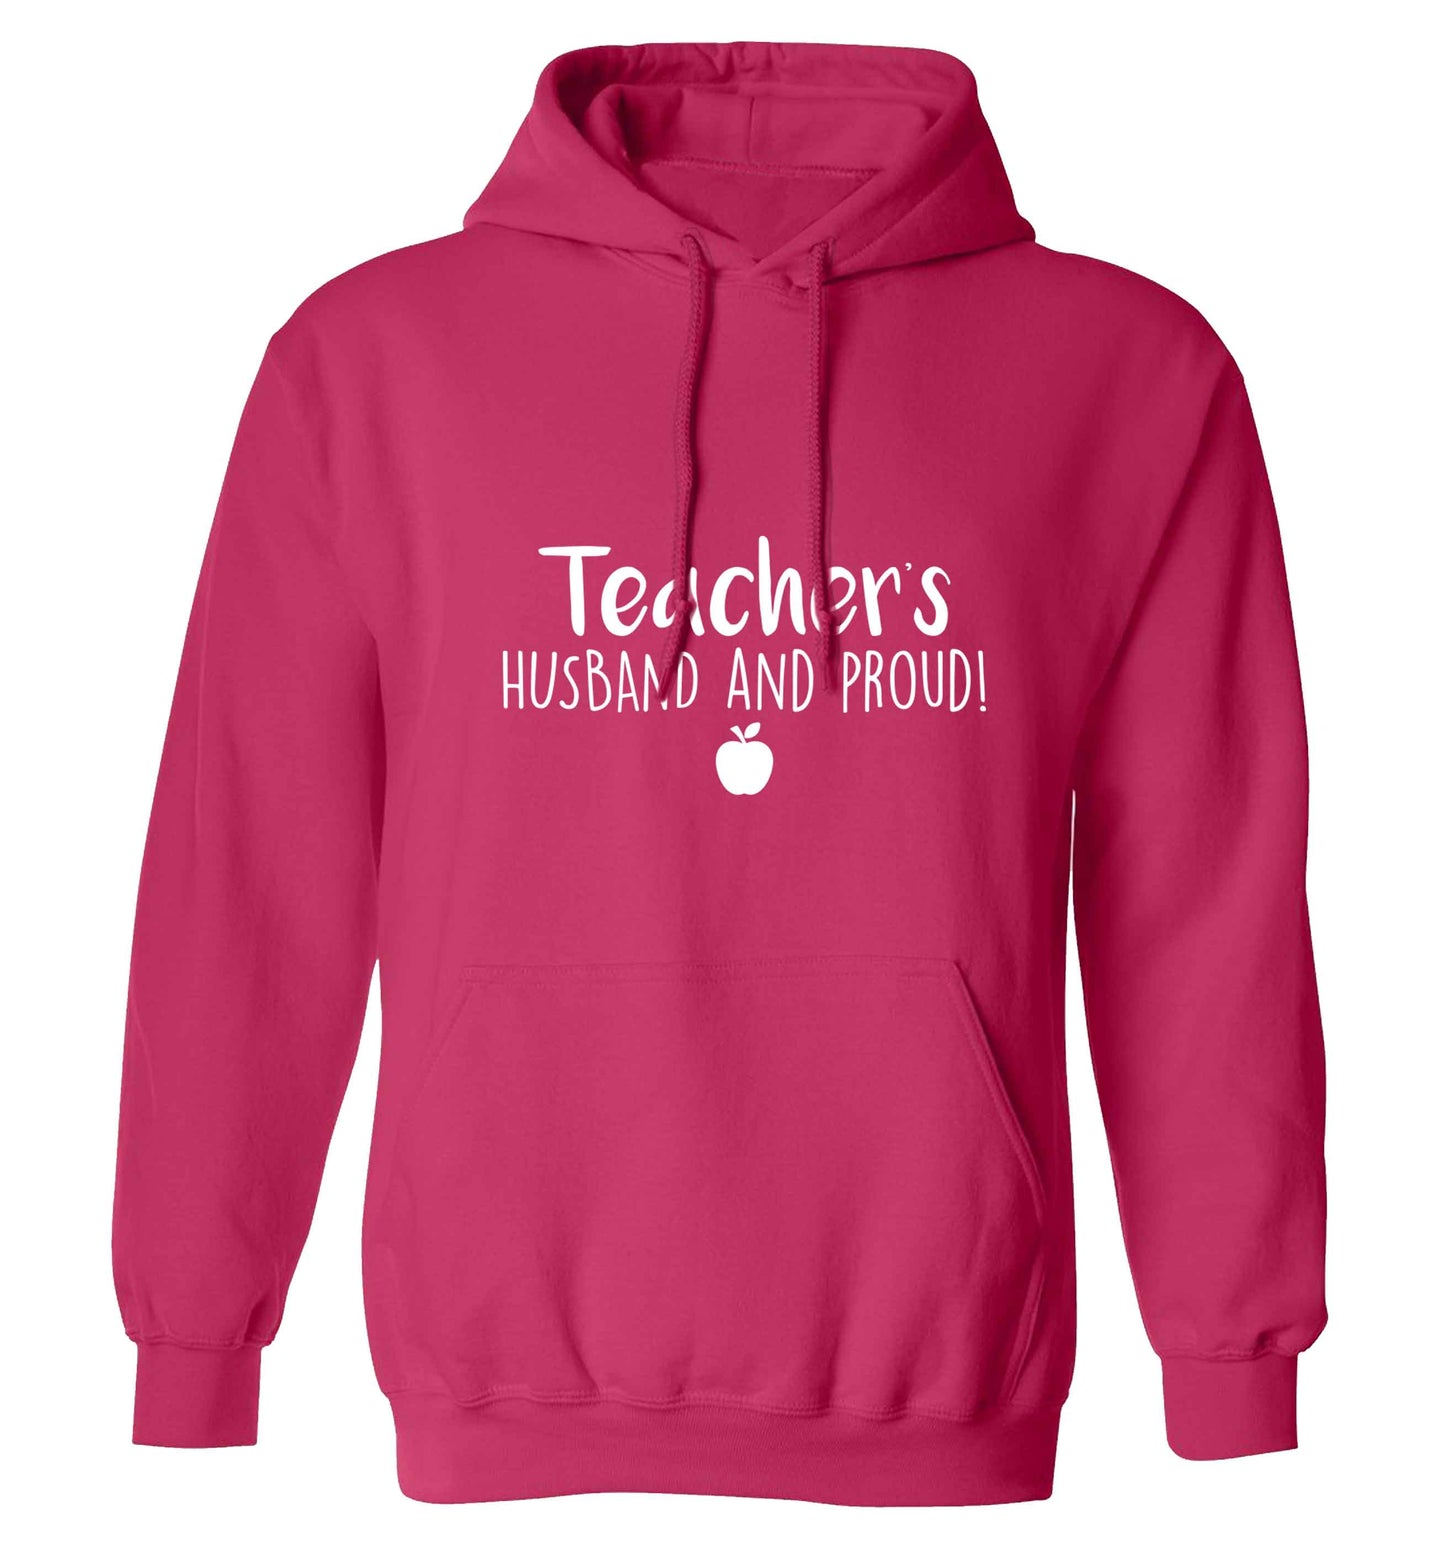 Teachers husband and proud adults unisex pink hoodie 2XL